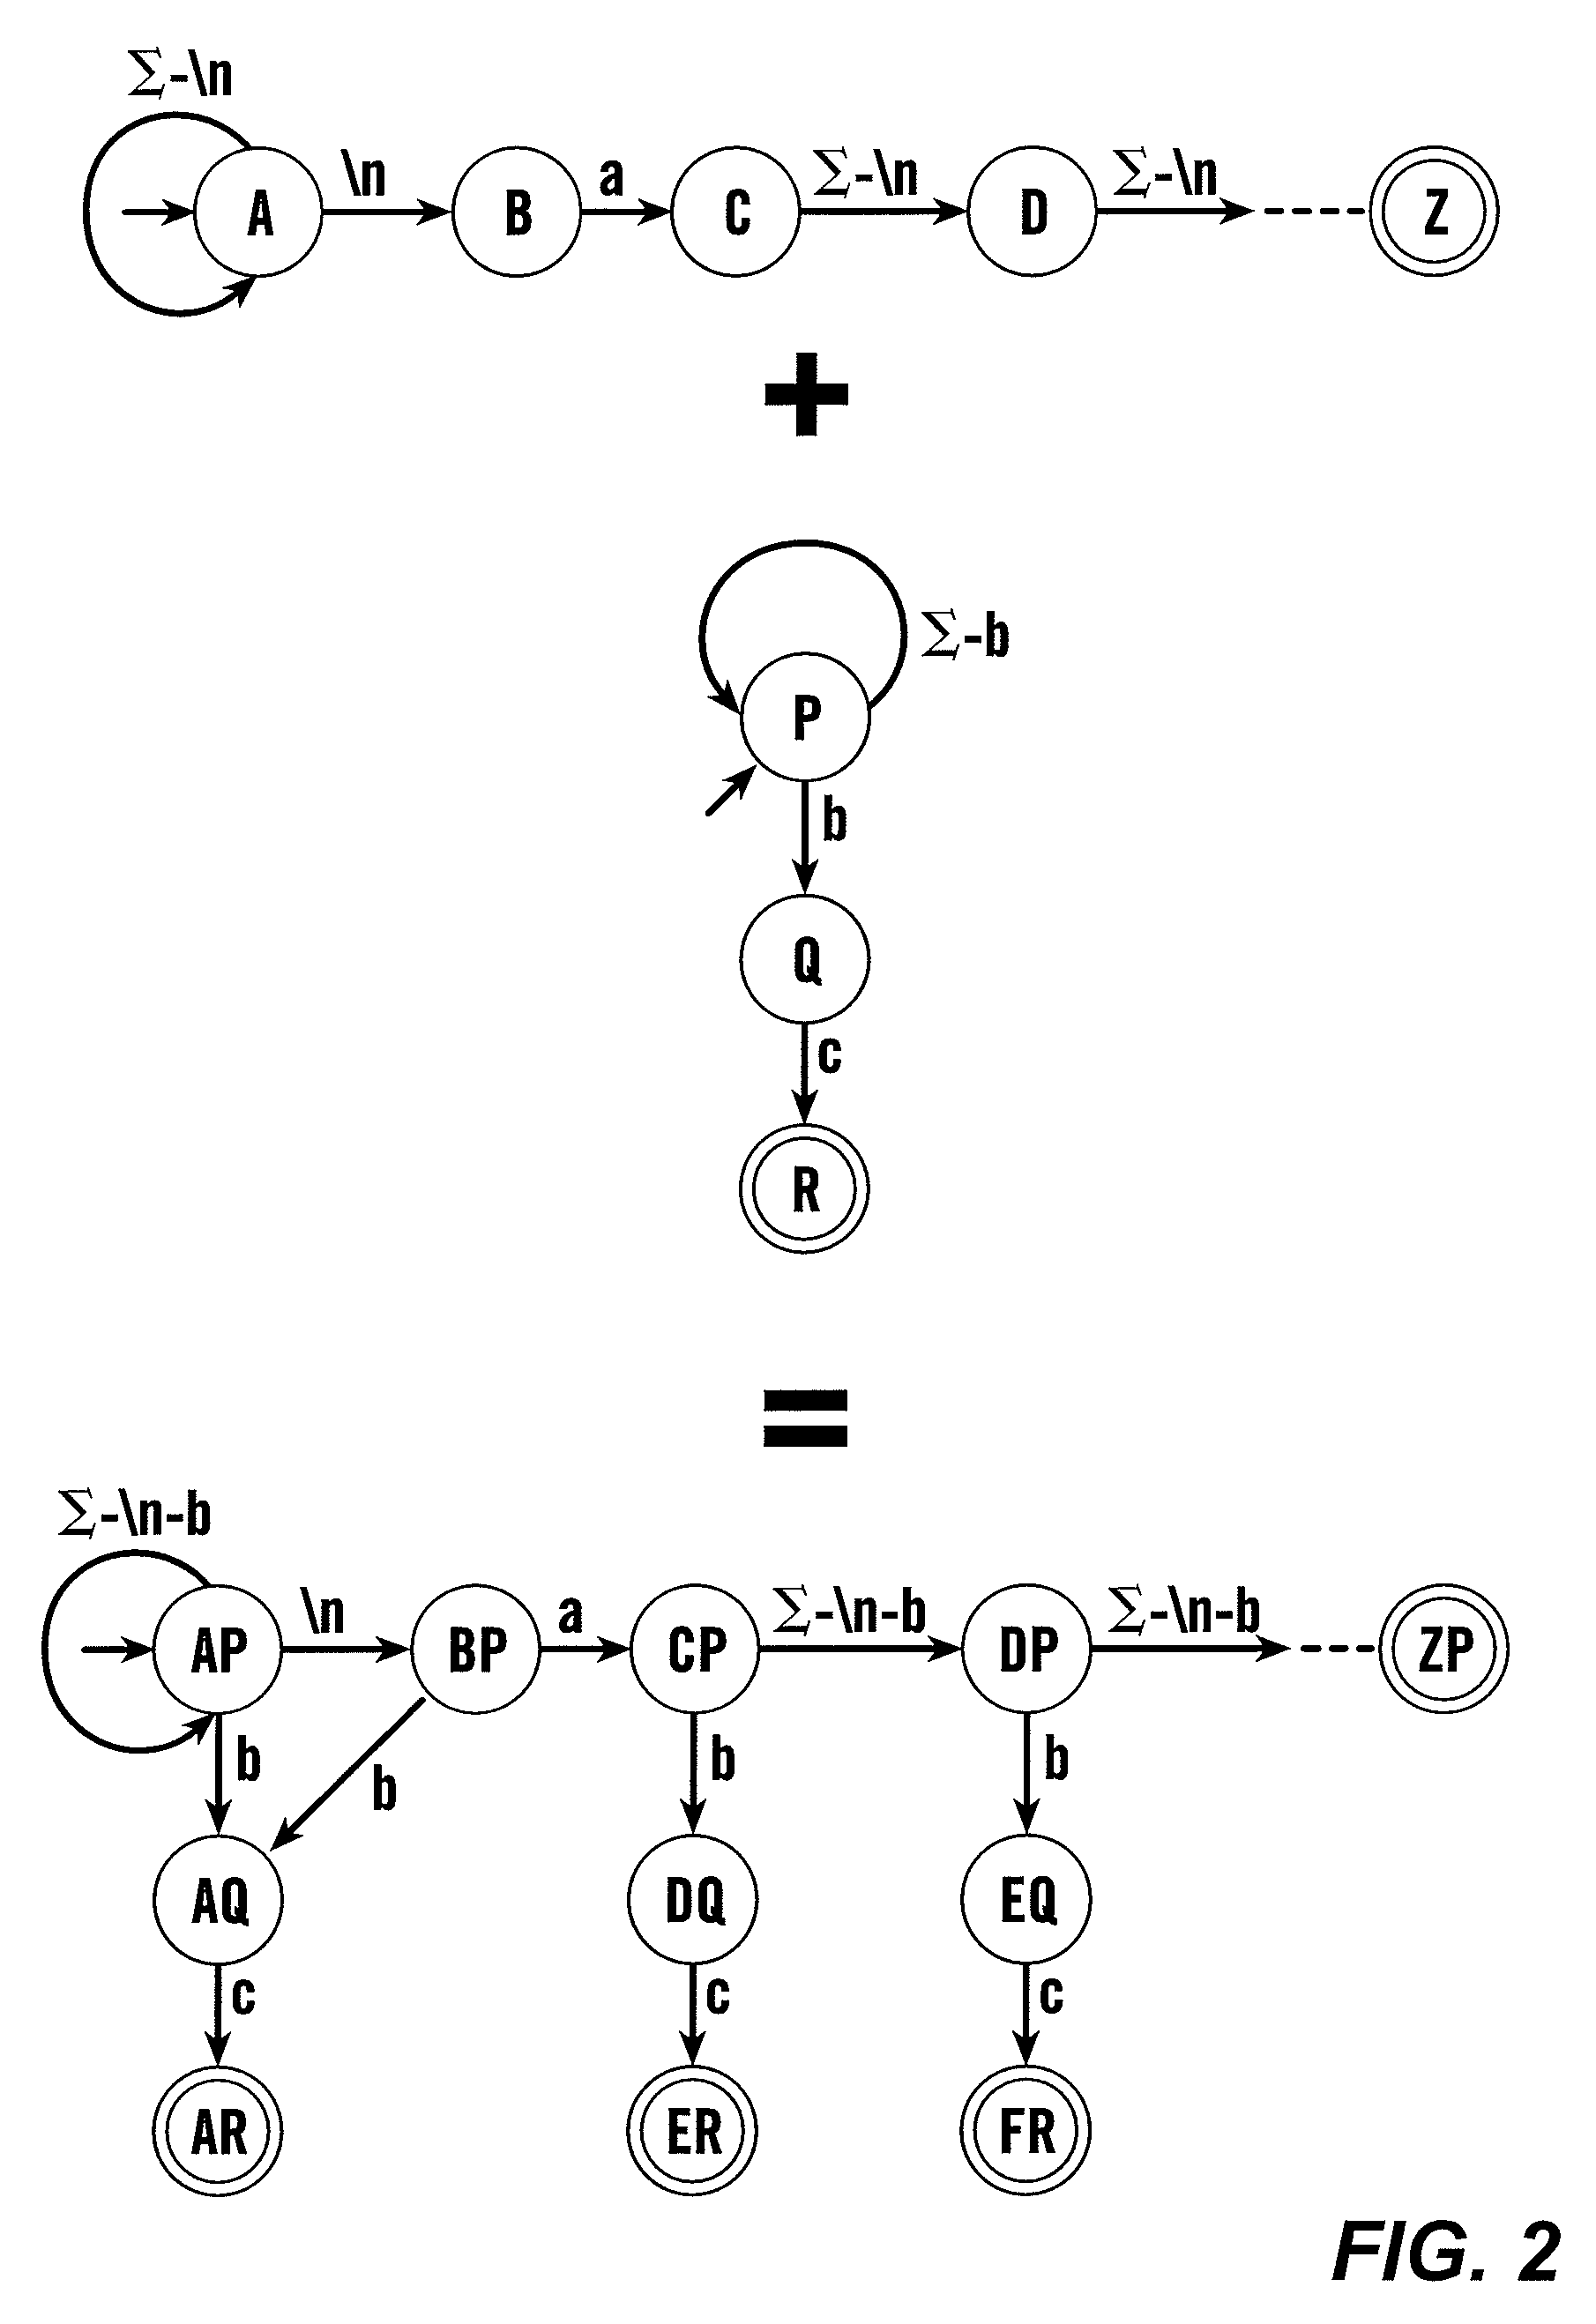 Extended finite state automata and systems and methods for recognizing patterns using extended finite state automata